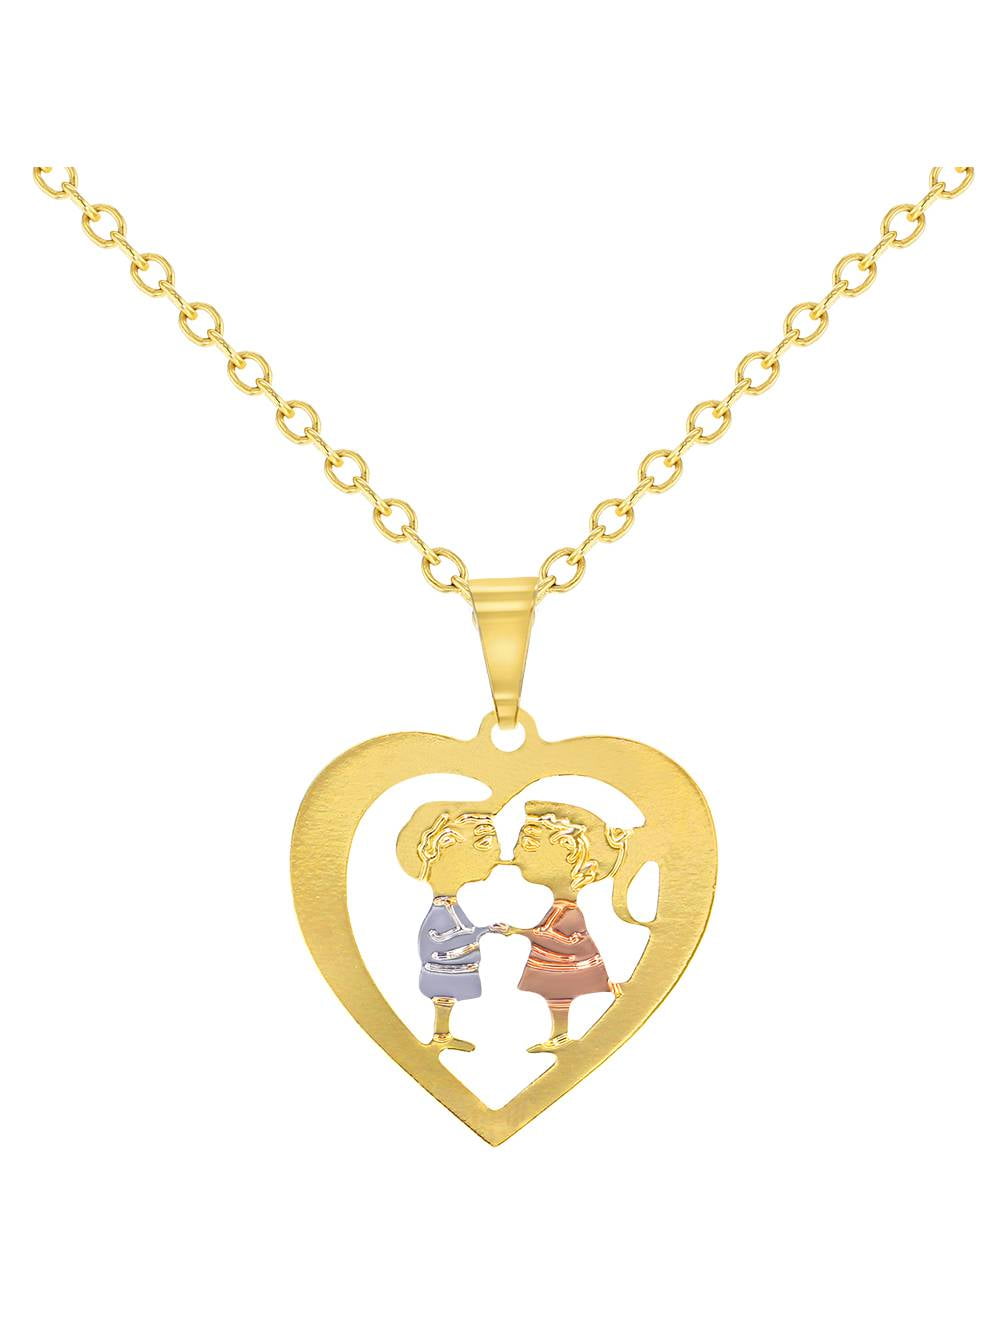 Valentine's Day Valentine's Day Gift Charm Pendant For Mom Zircon Stone Necklace Round Necklace 14K Gold Bagel Pendant For Her